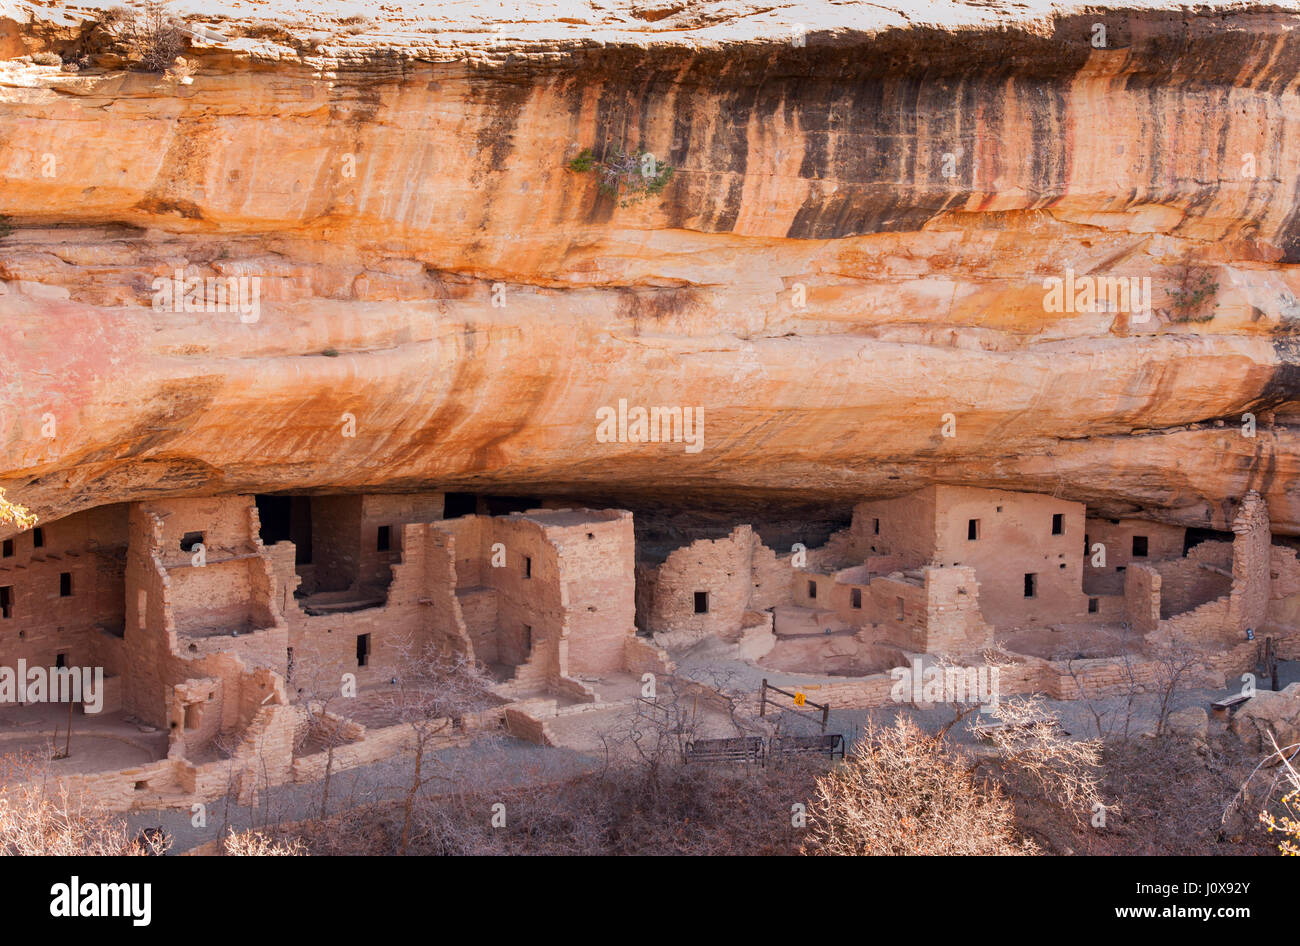 Mesa Verde National Park; Colorado; Spruce Tree House; Native American Ruins; Cliff Dwellings; Hopi Culture. Stock Photo